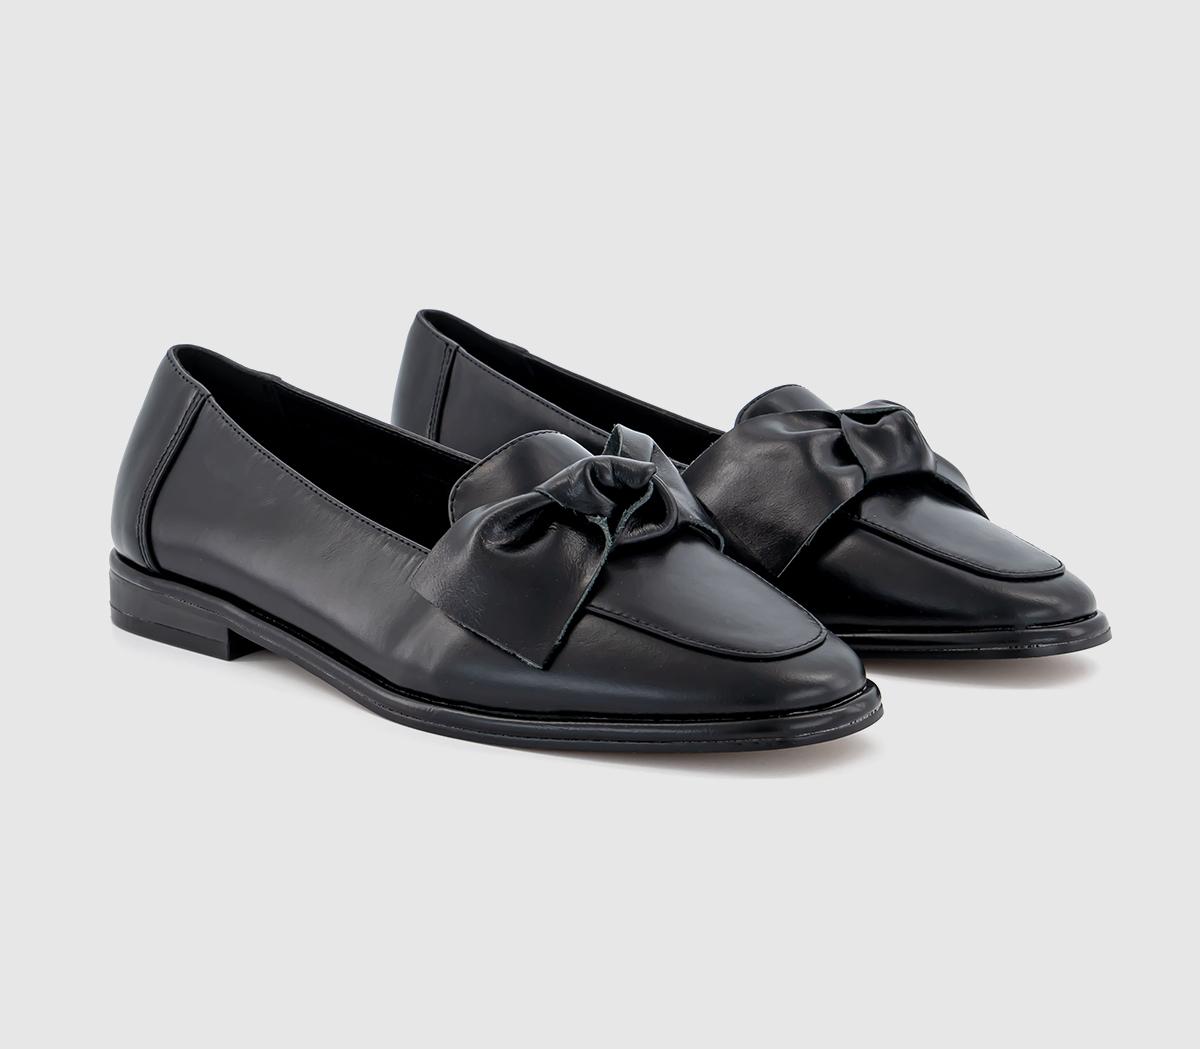 OFFICE Womens Fallon Bow Leather Loafer Black, 3